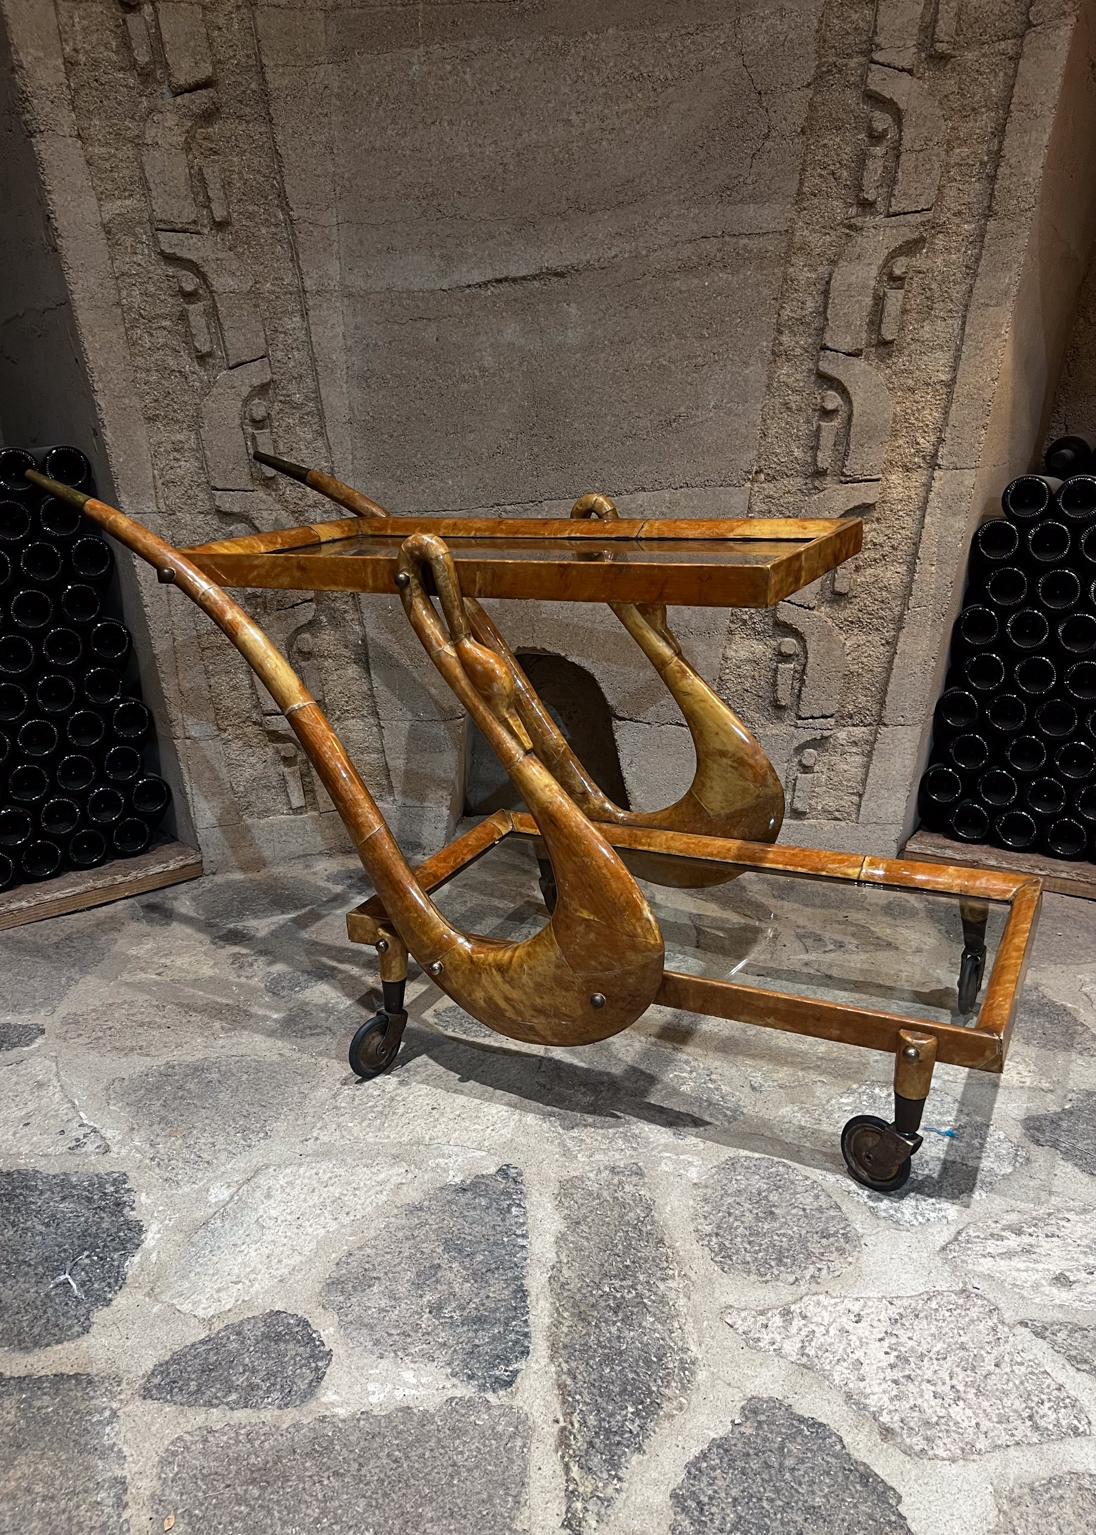 1950s Sensational Aldo Tura Bar Dessert Service Cart
Sculptural Italian Wood with Patinated Brass Accent
Two glass shelves
28.5 tall x 19.5 w x 45 d
Preowned original condition
Please review.